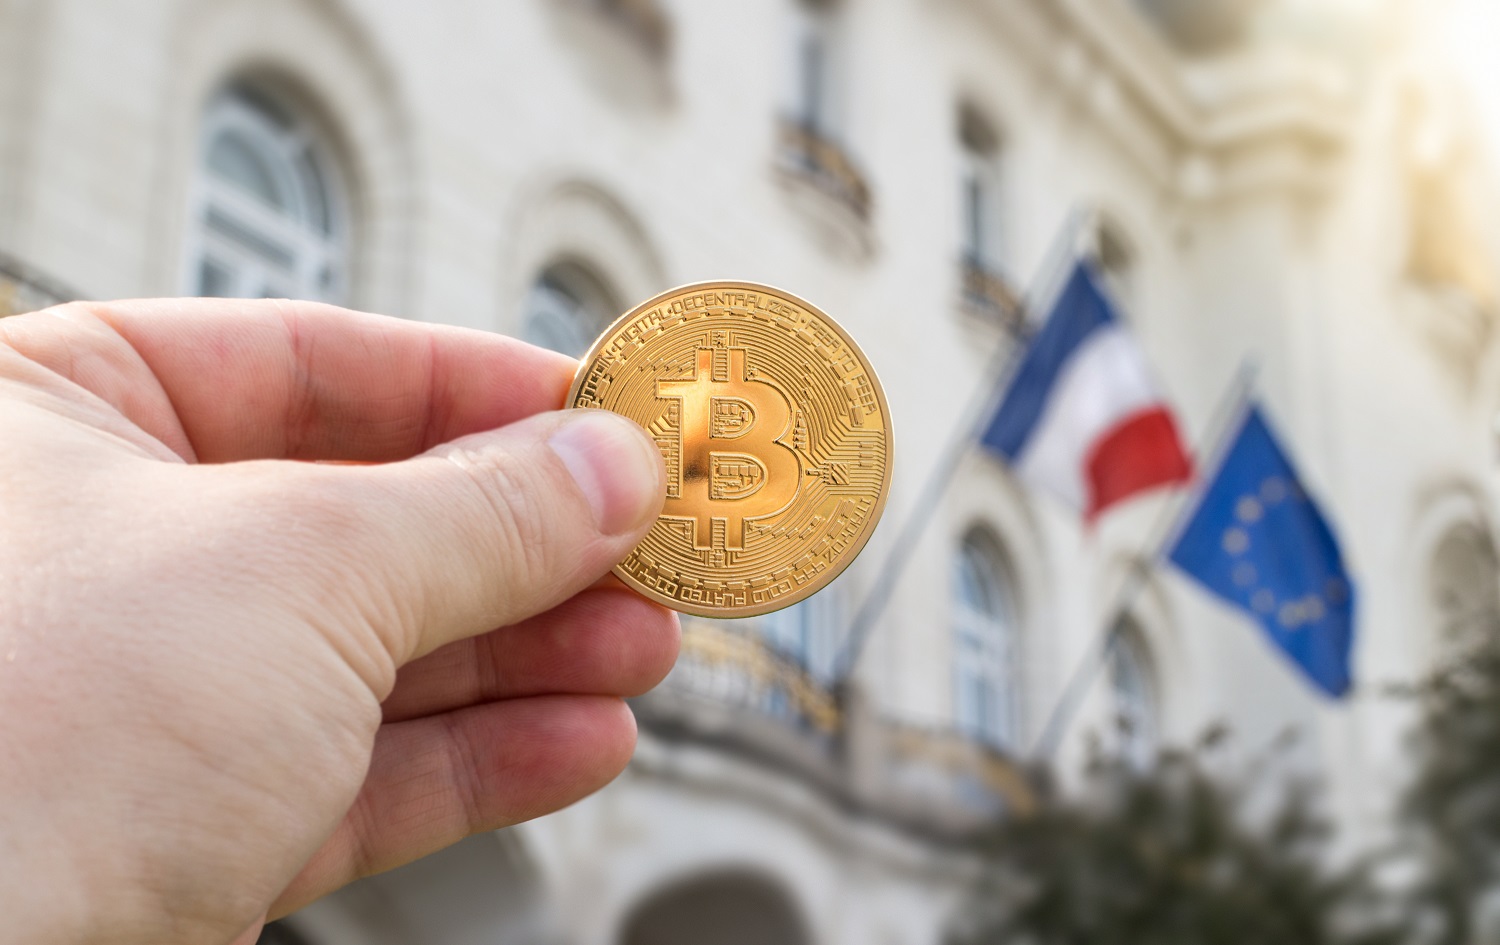 A person’s hand holds up a metal token intended to represent Bitcoin against the background of a building and the EU and French flags.